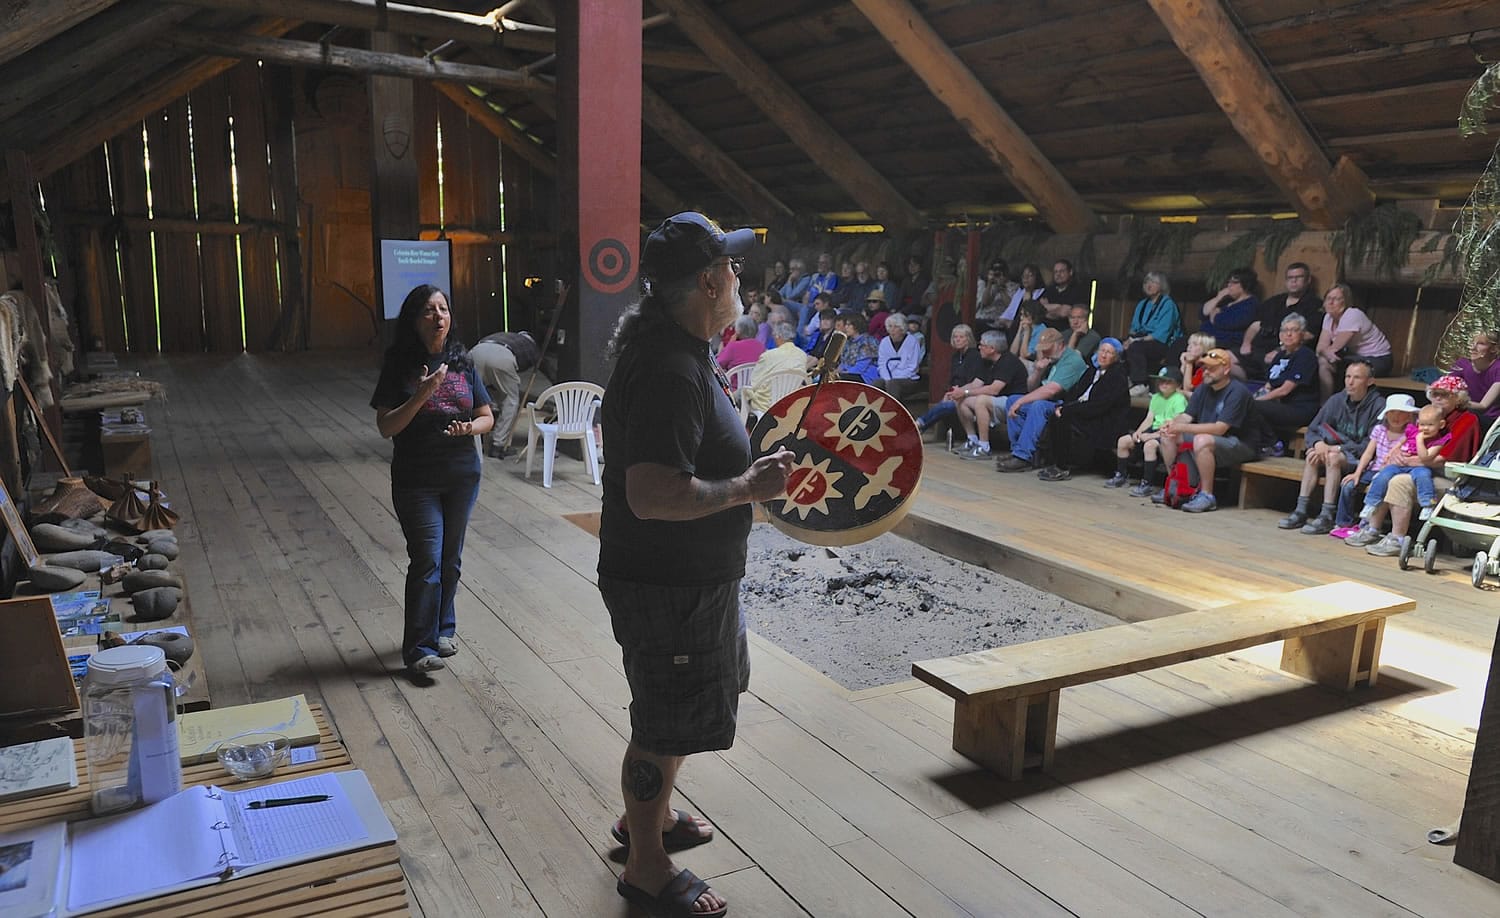 Sam Robinson, center, acting chairman of the Chinook Indian Nation, beats a drum and sings a traditional song of blessing Sunday at the Cathlapotle Plankhouse in Ridgefield before a presentation about native women's views of Lewis and Clark.